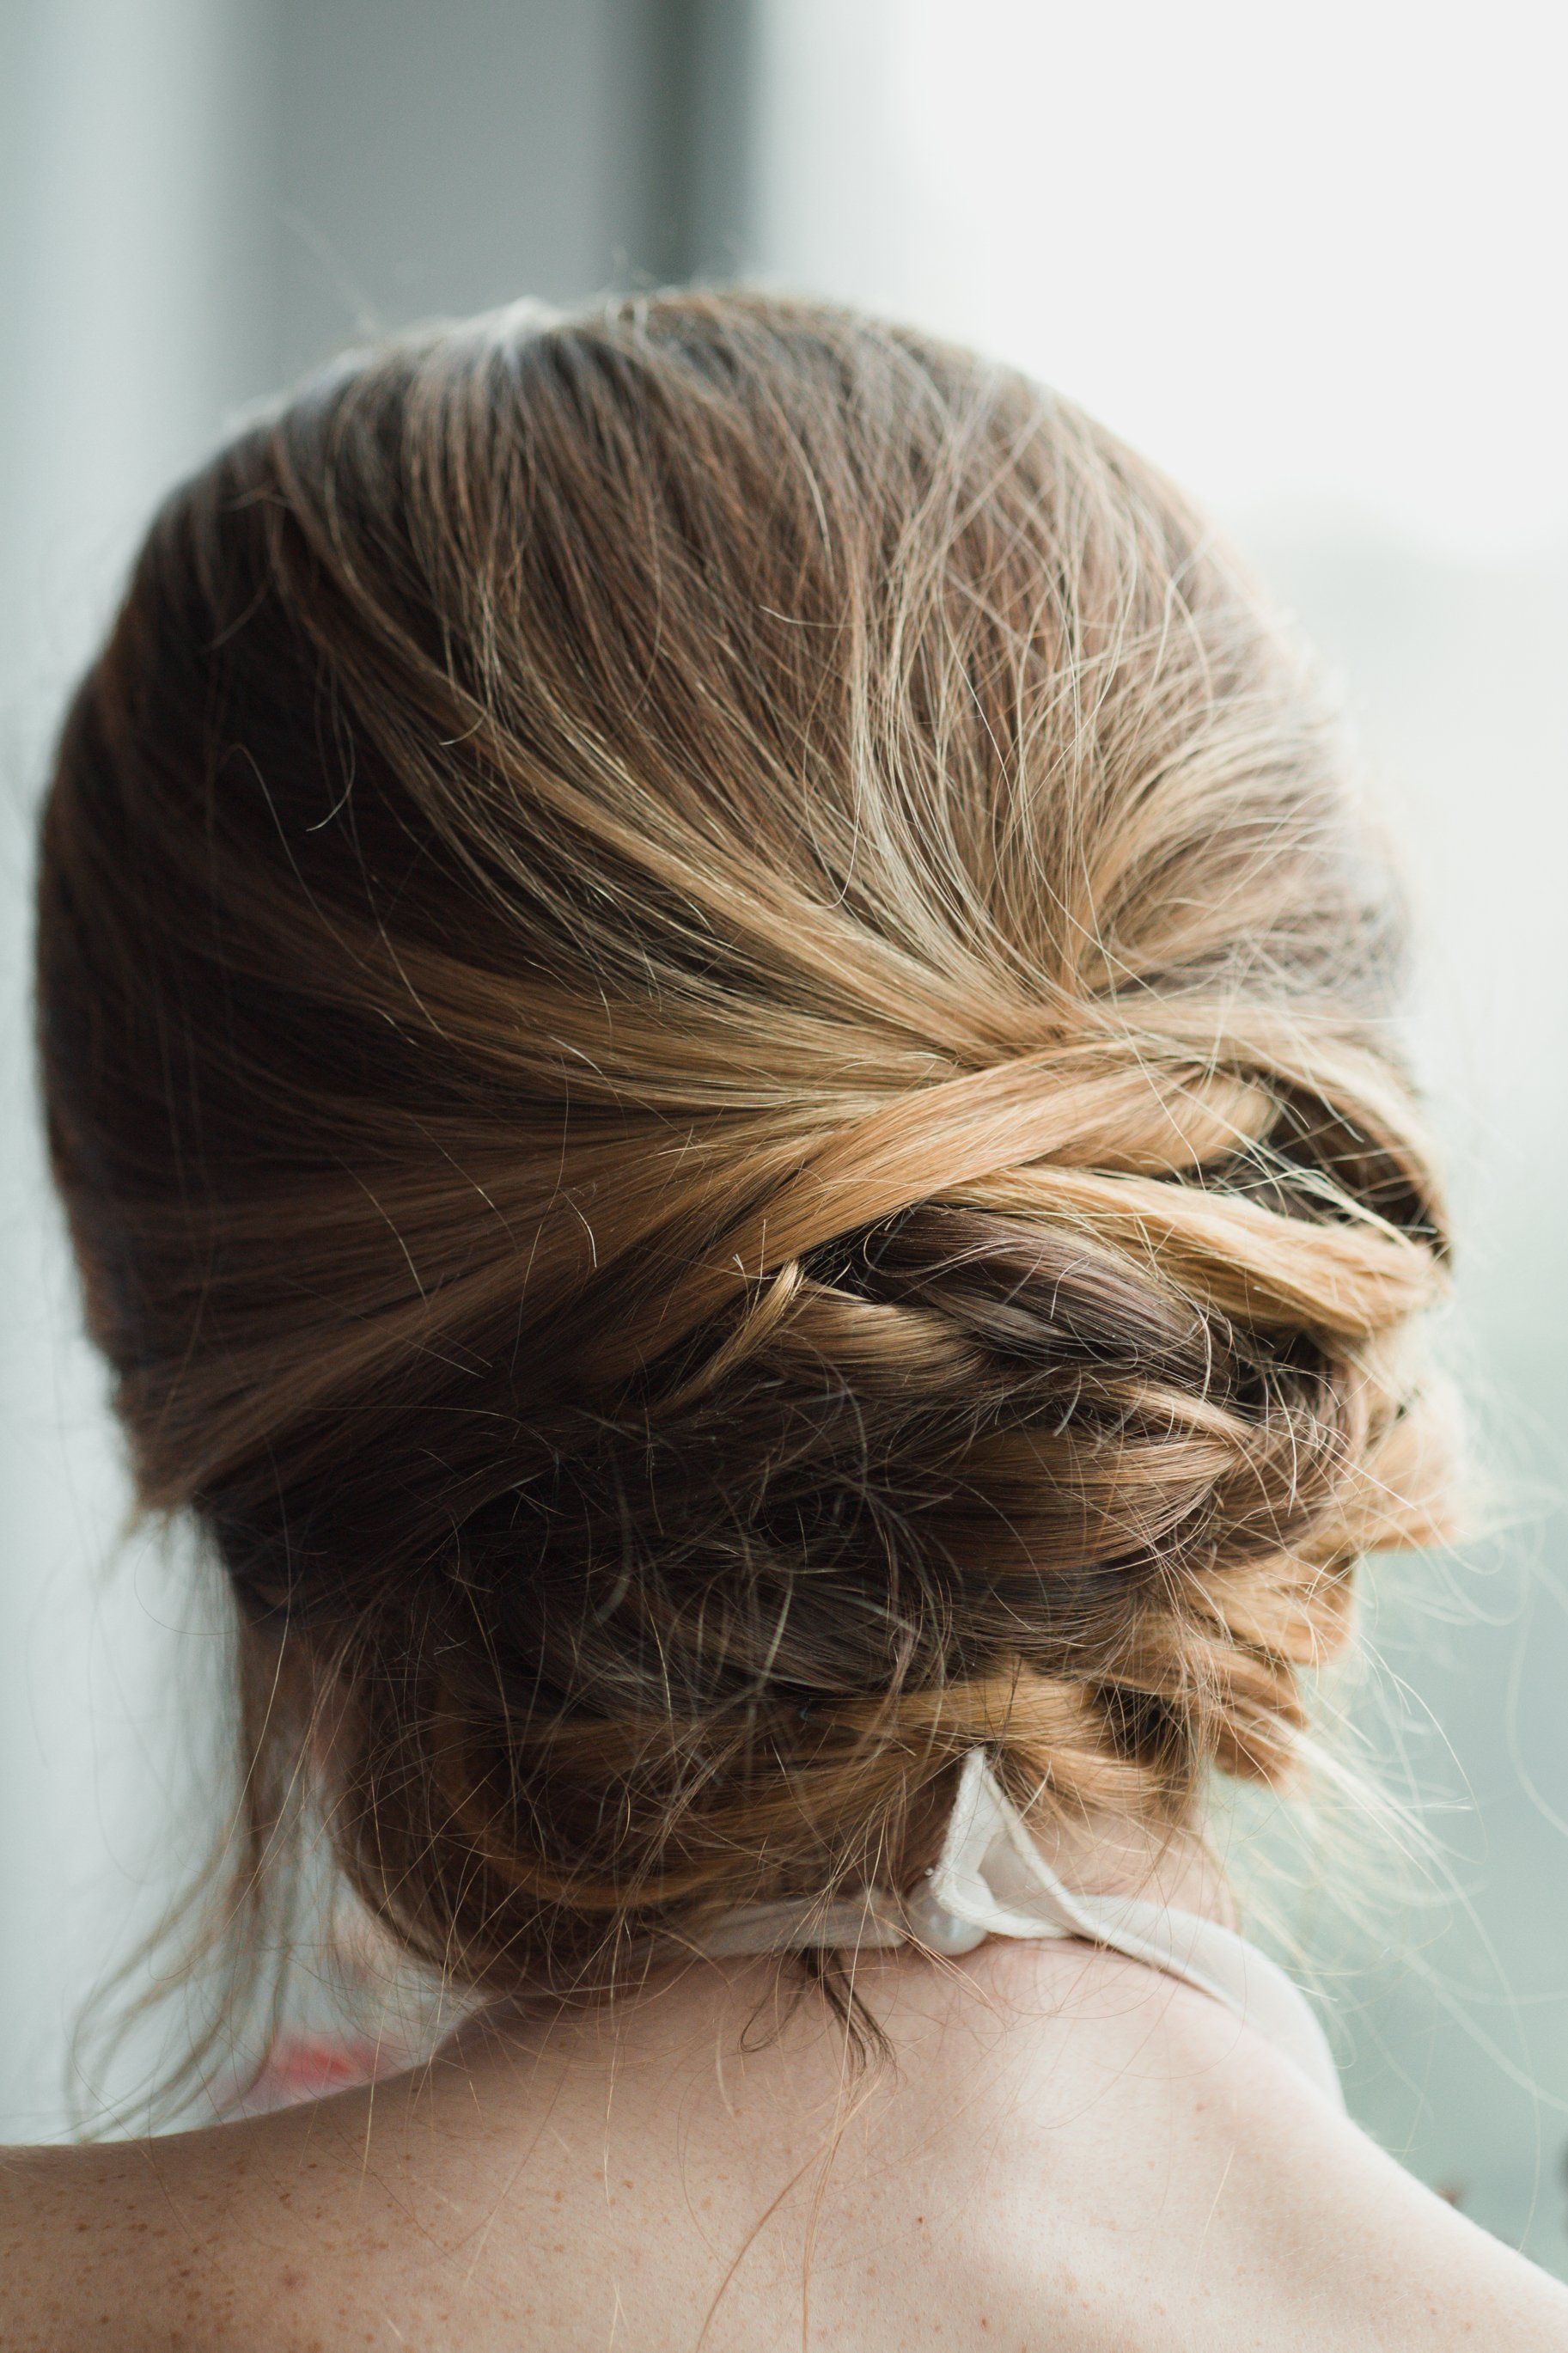 A woman's hair tied up in a bun, perfect for hair tissue mineral analysis (HTMA) tests.